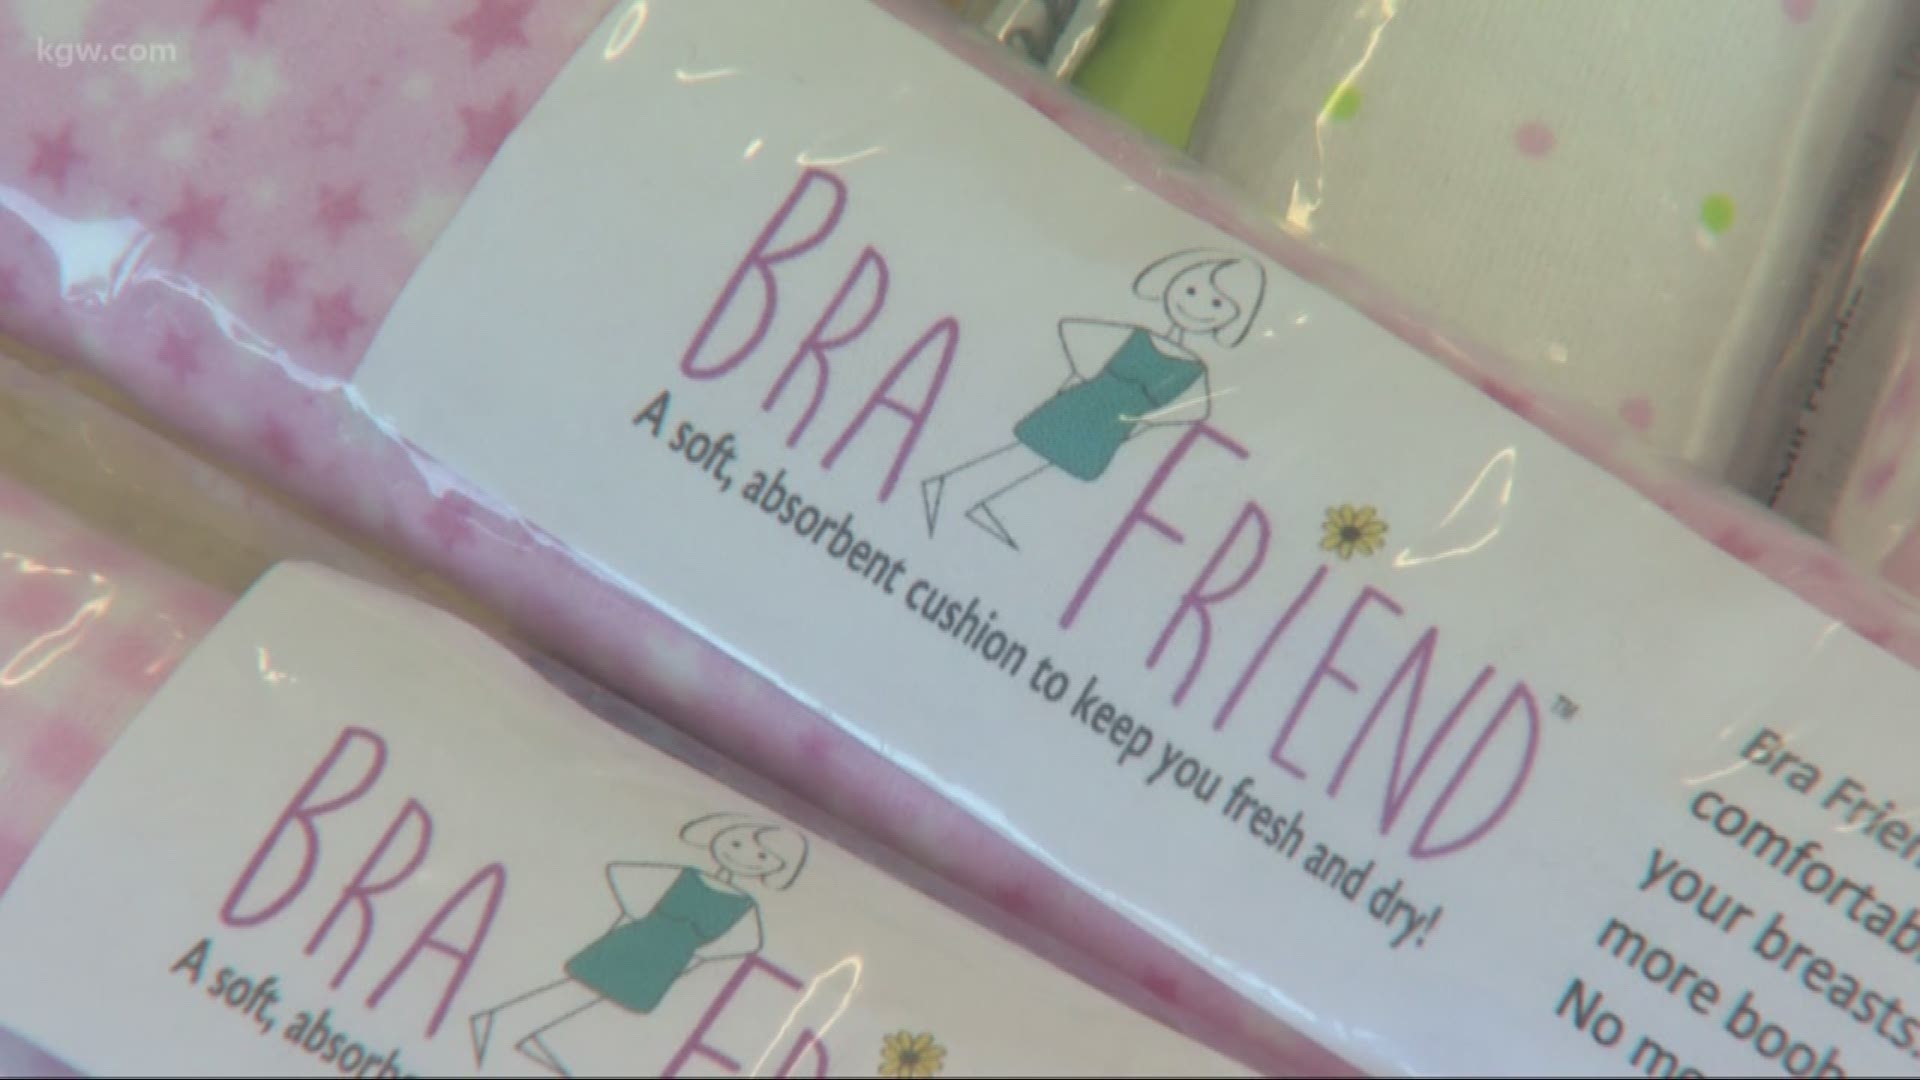 The creator of Bra Friend came up with the product after getting a painful rash. She said it helps to absorb moisture and keep the under-breast area cool.